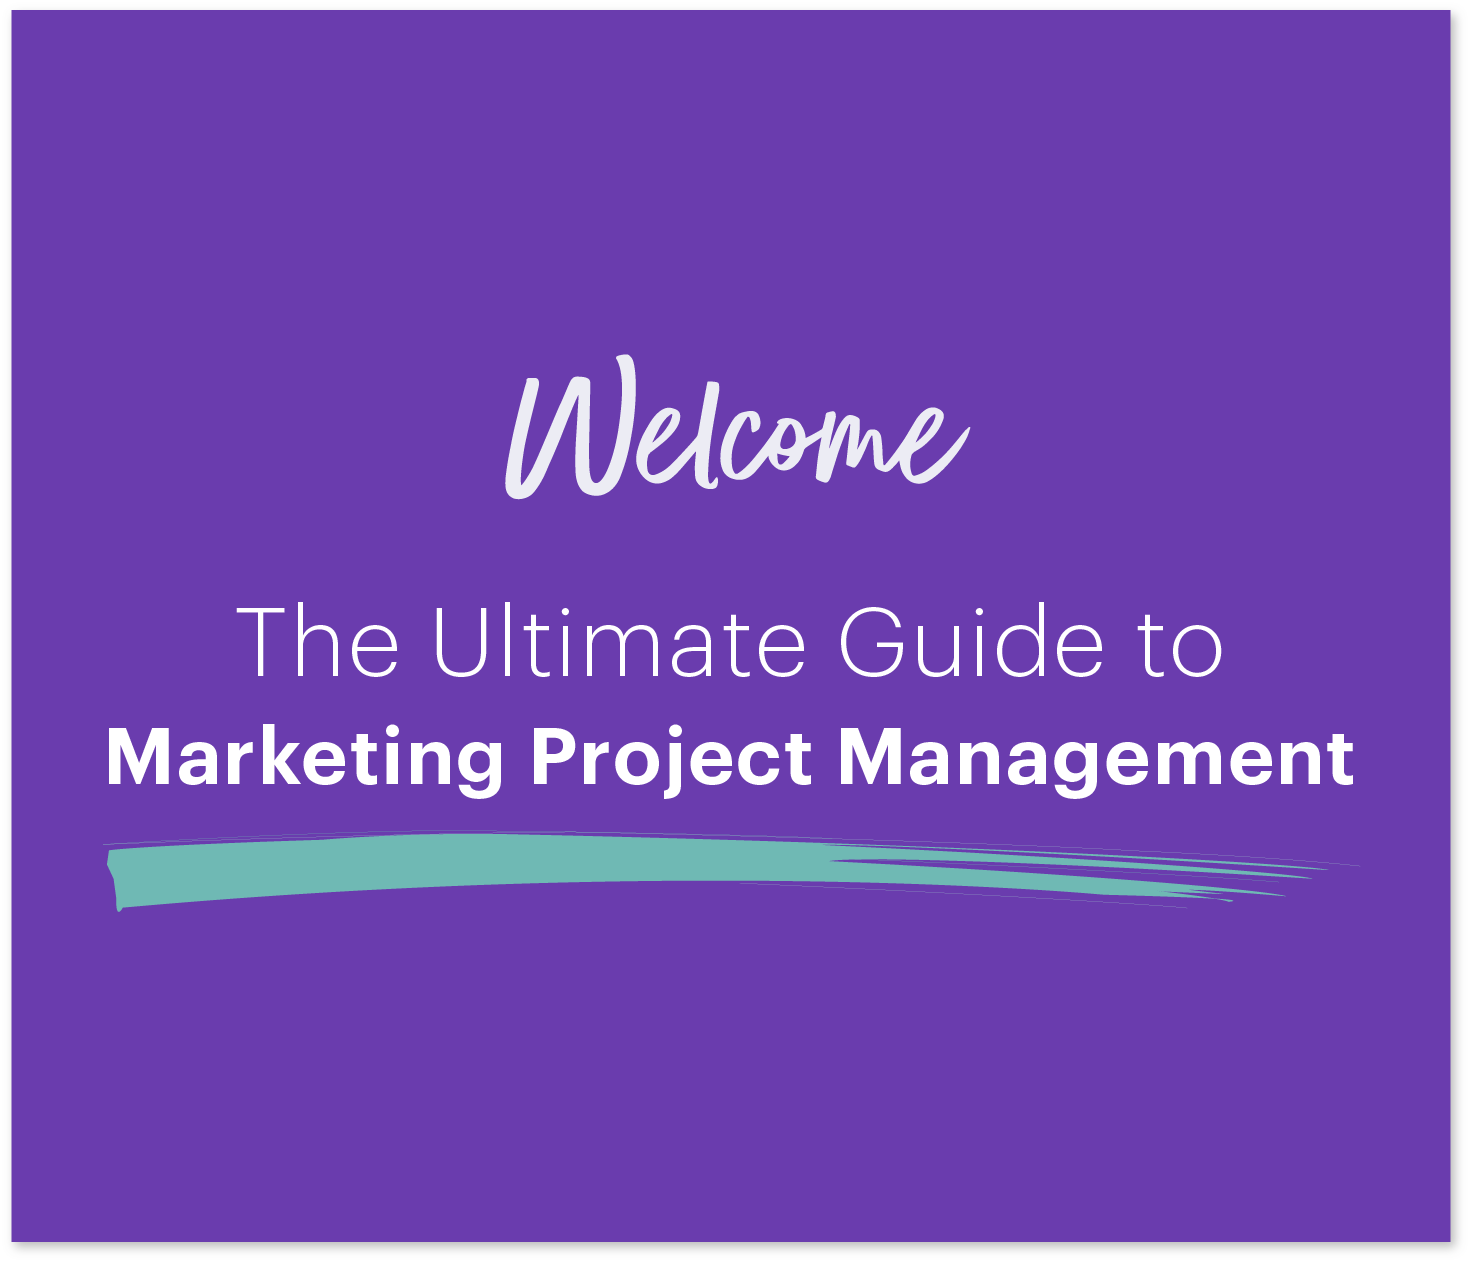 The Ultimate Guide to Marketing Project Management